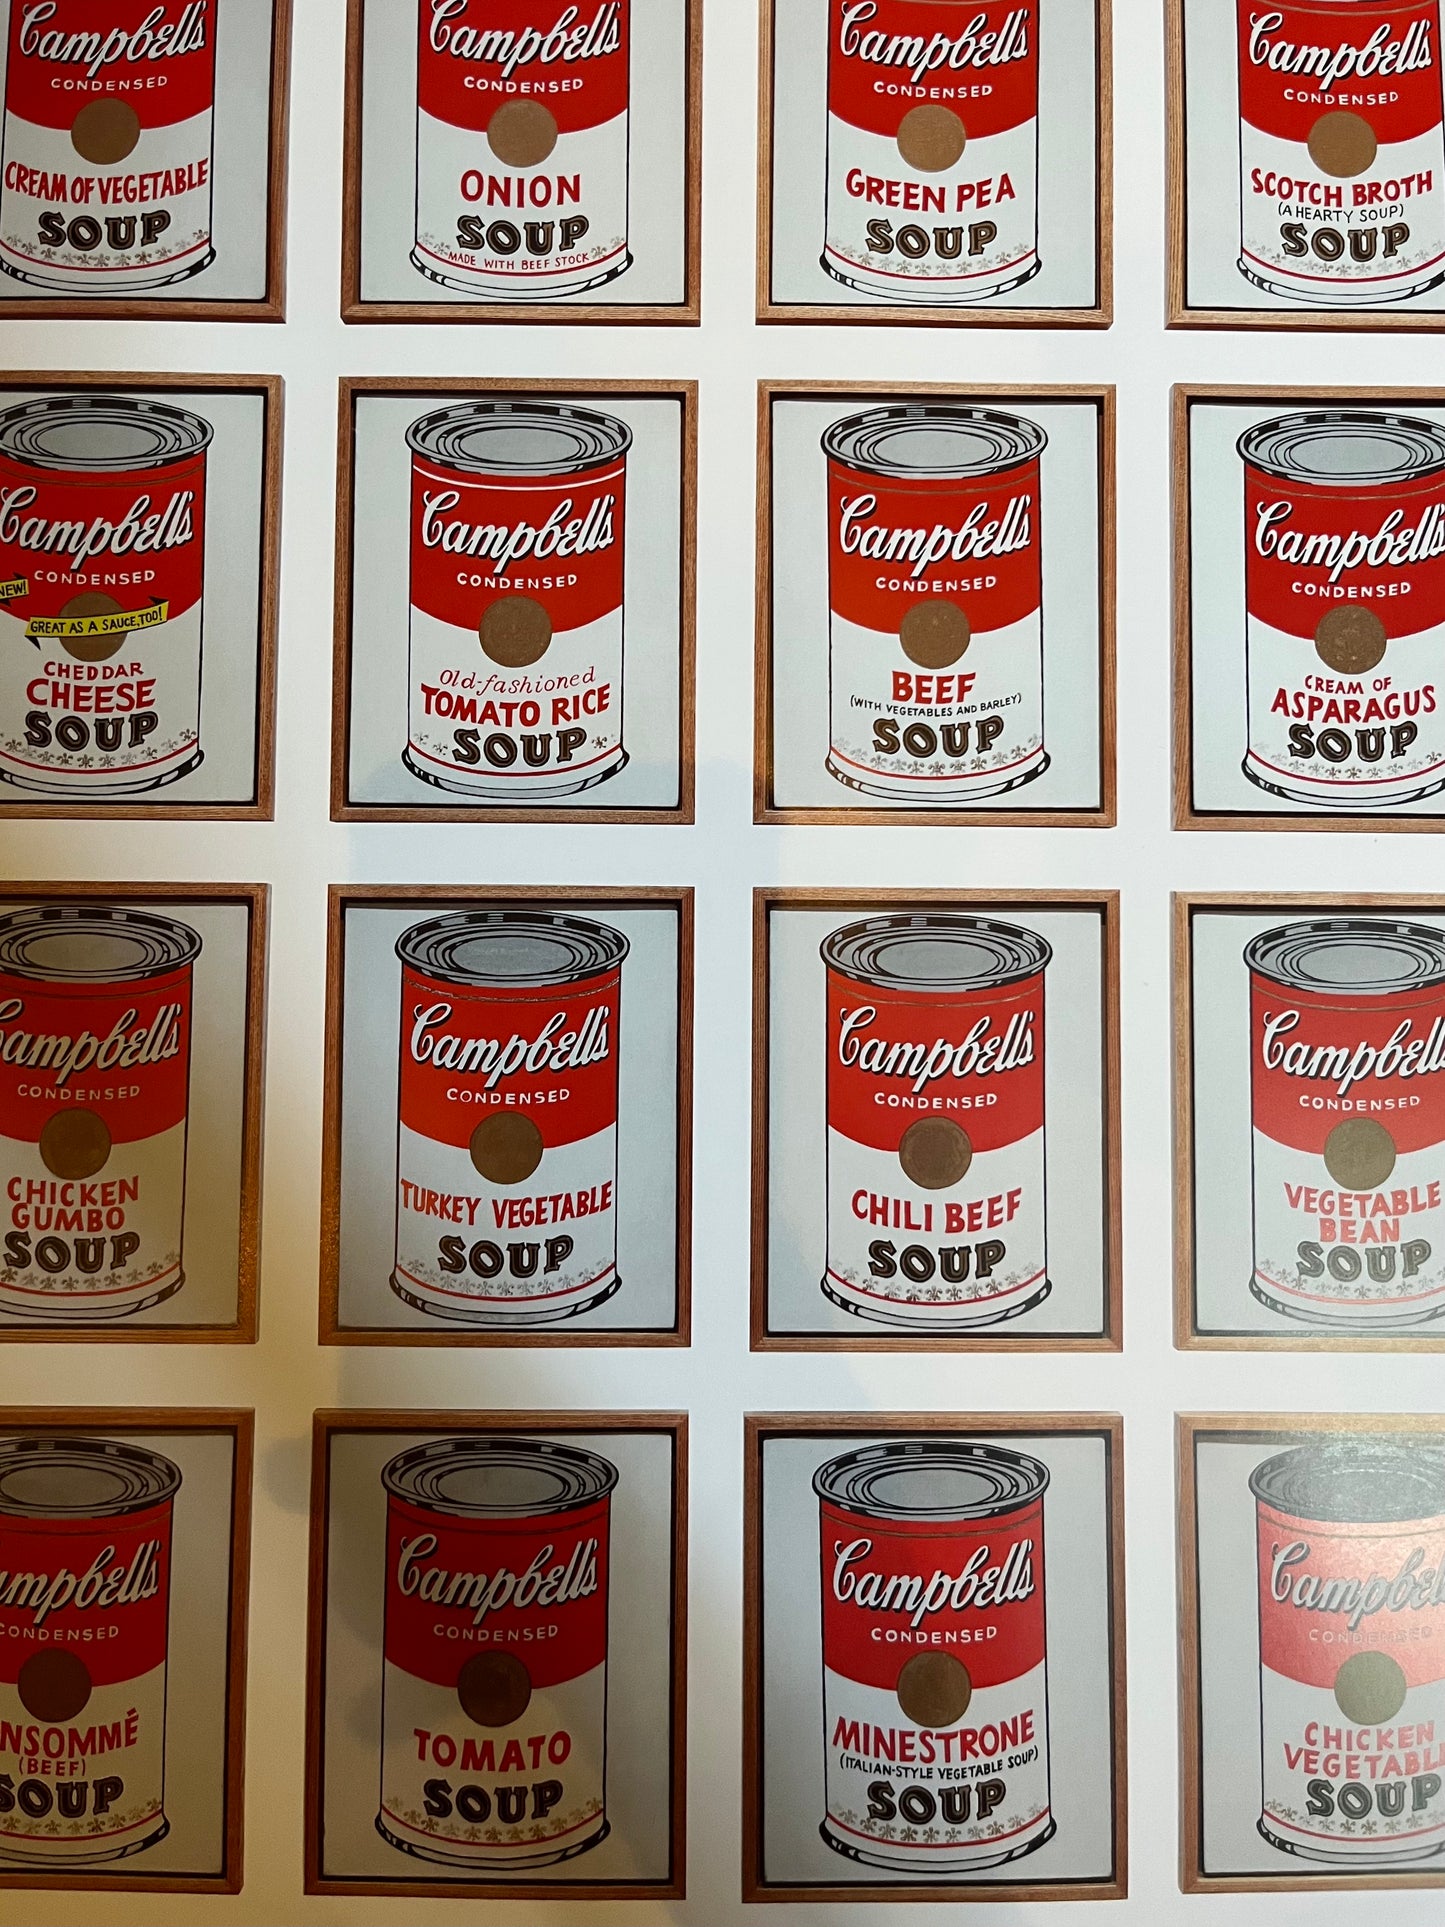 Andy Warhol, Campbell's Soup Cans (1962), Lithographie Offset